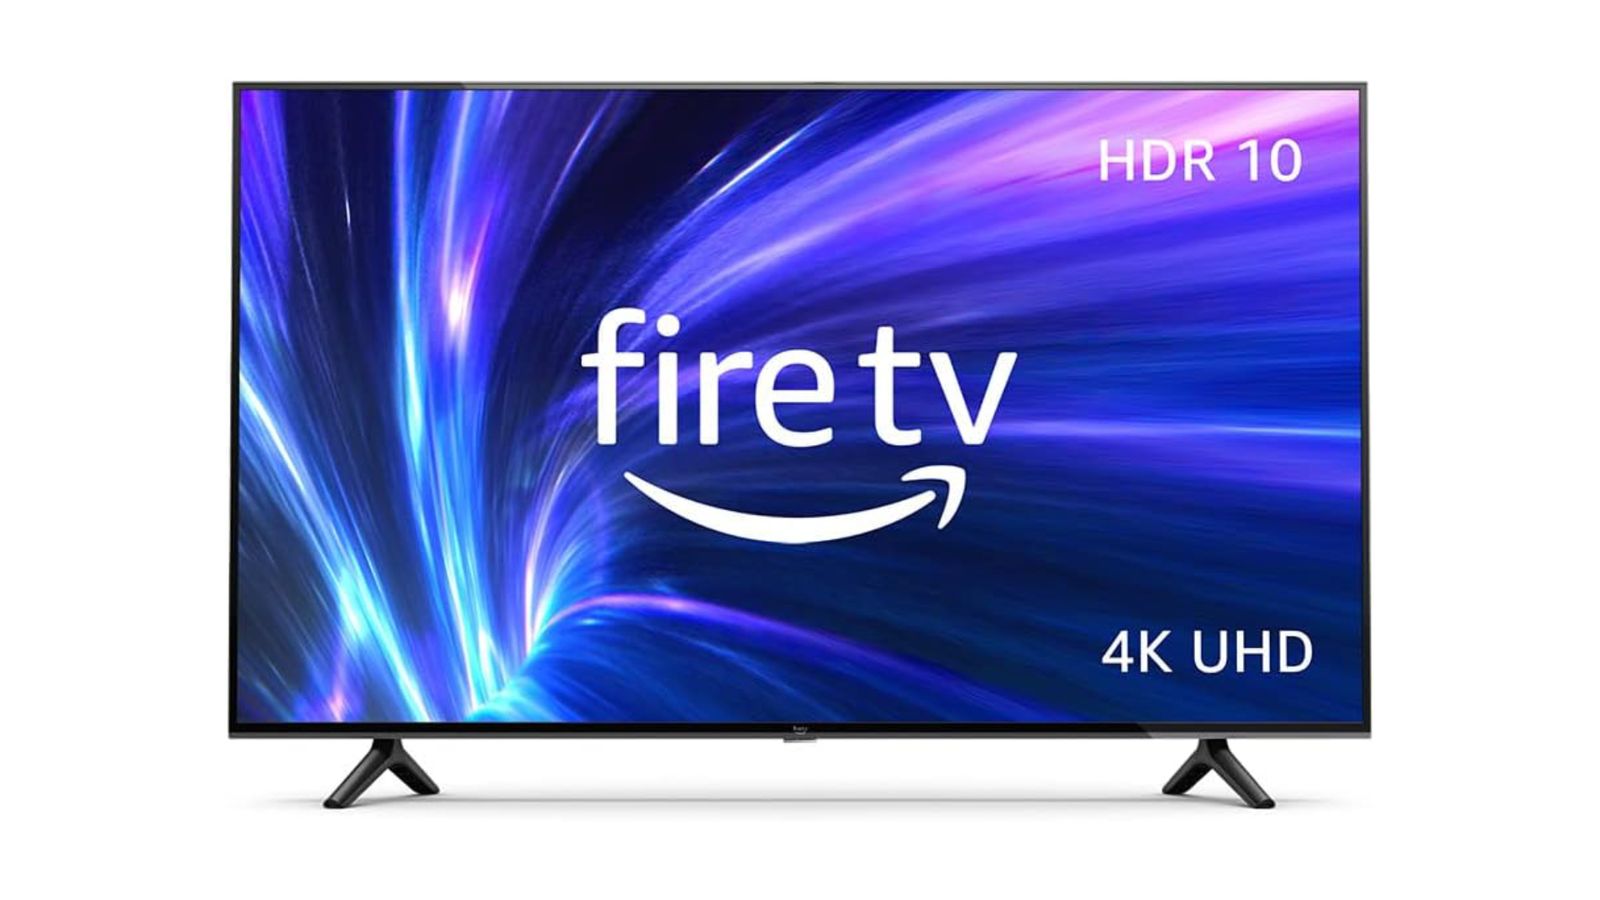 Amazon Fire TV product image product image of a black flatscreen TV featuring a blue and purple background on the display.